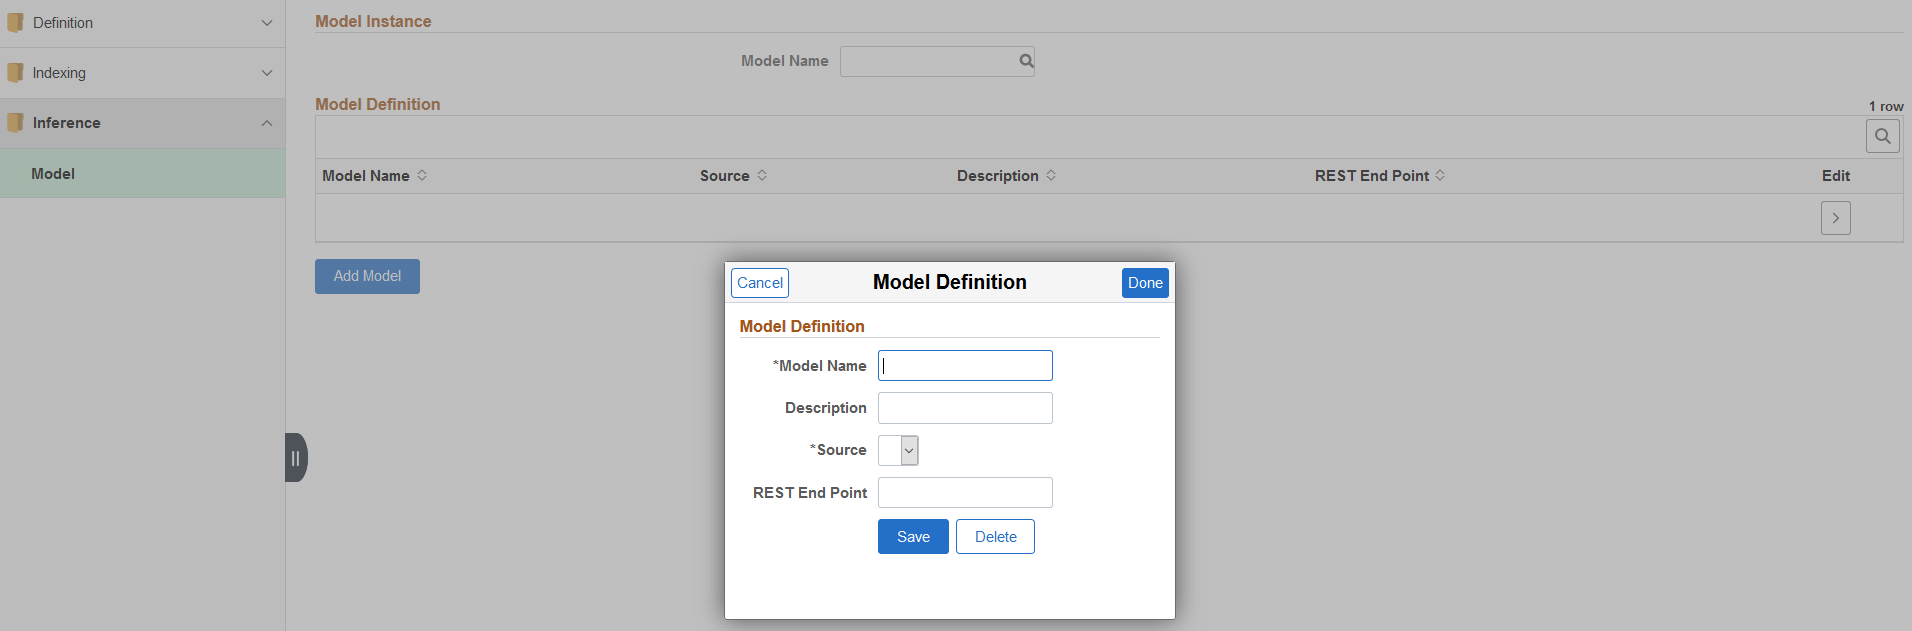 Model Definition page